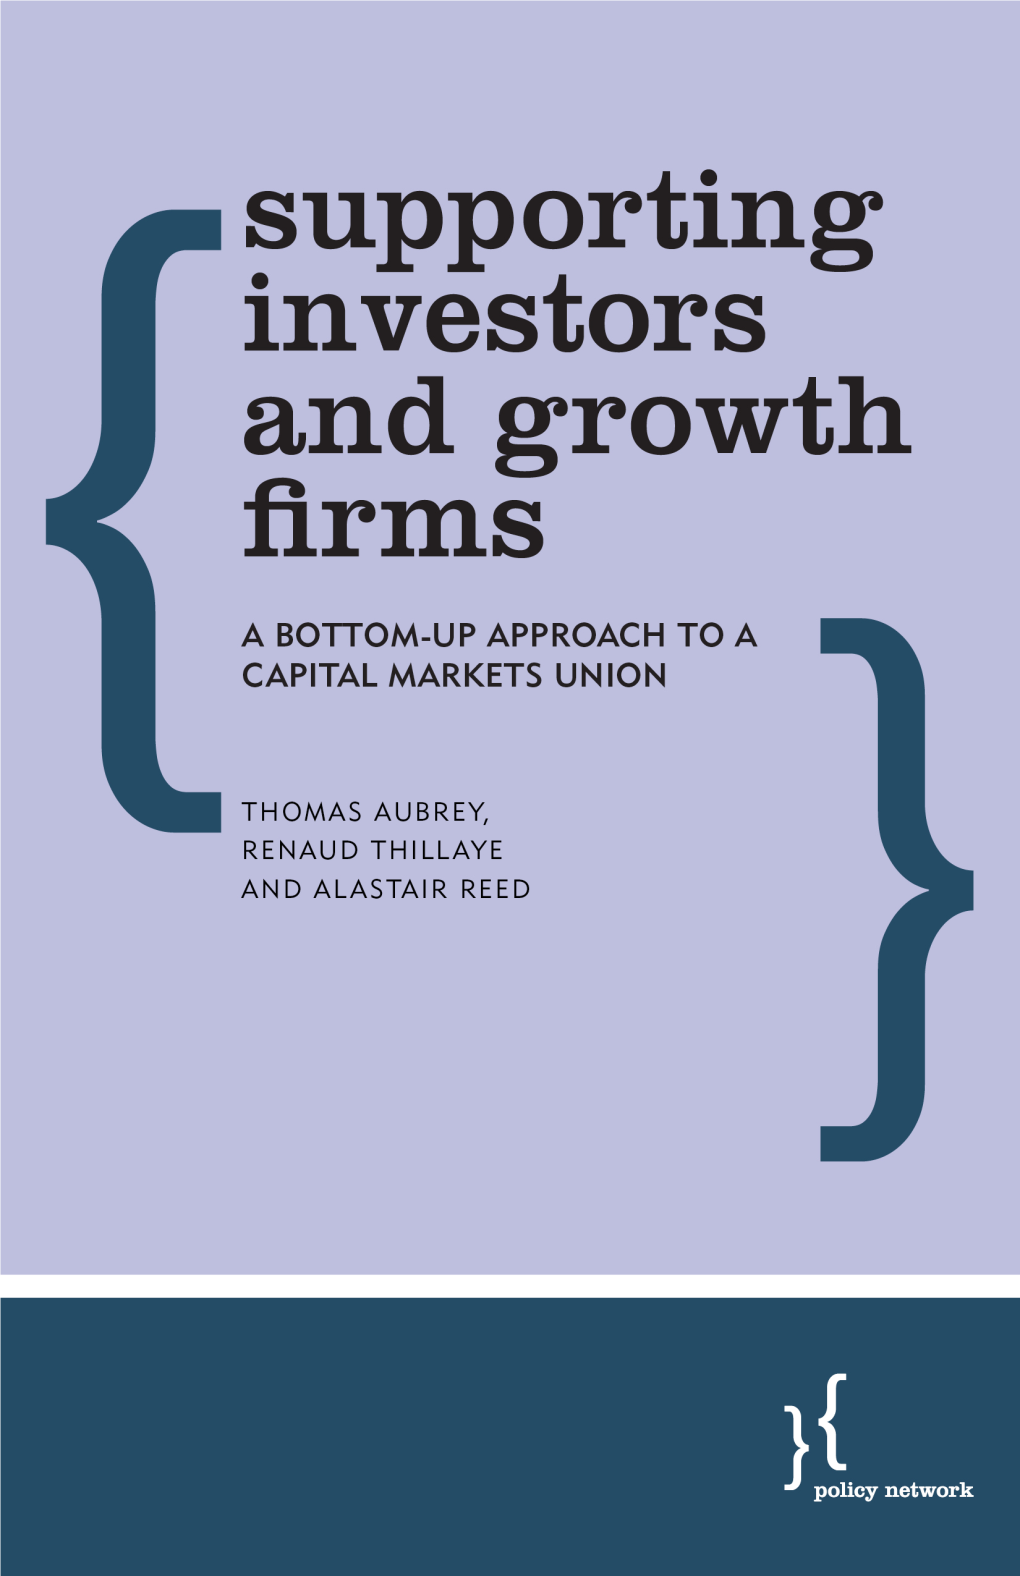 SUPPORTING INVESTORS and GROWTH FIRMS a Bottom-Up Approach to a Capital